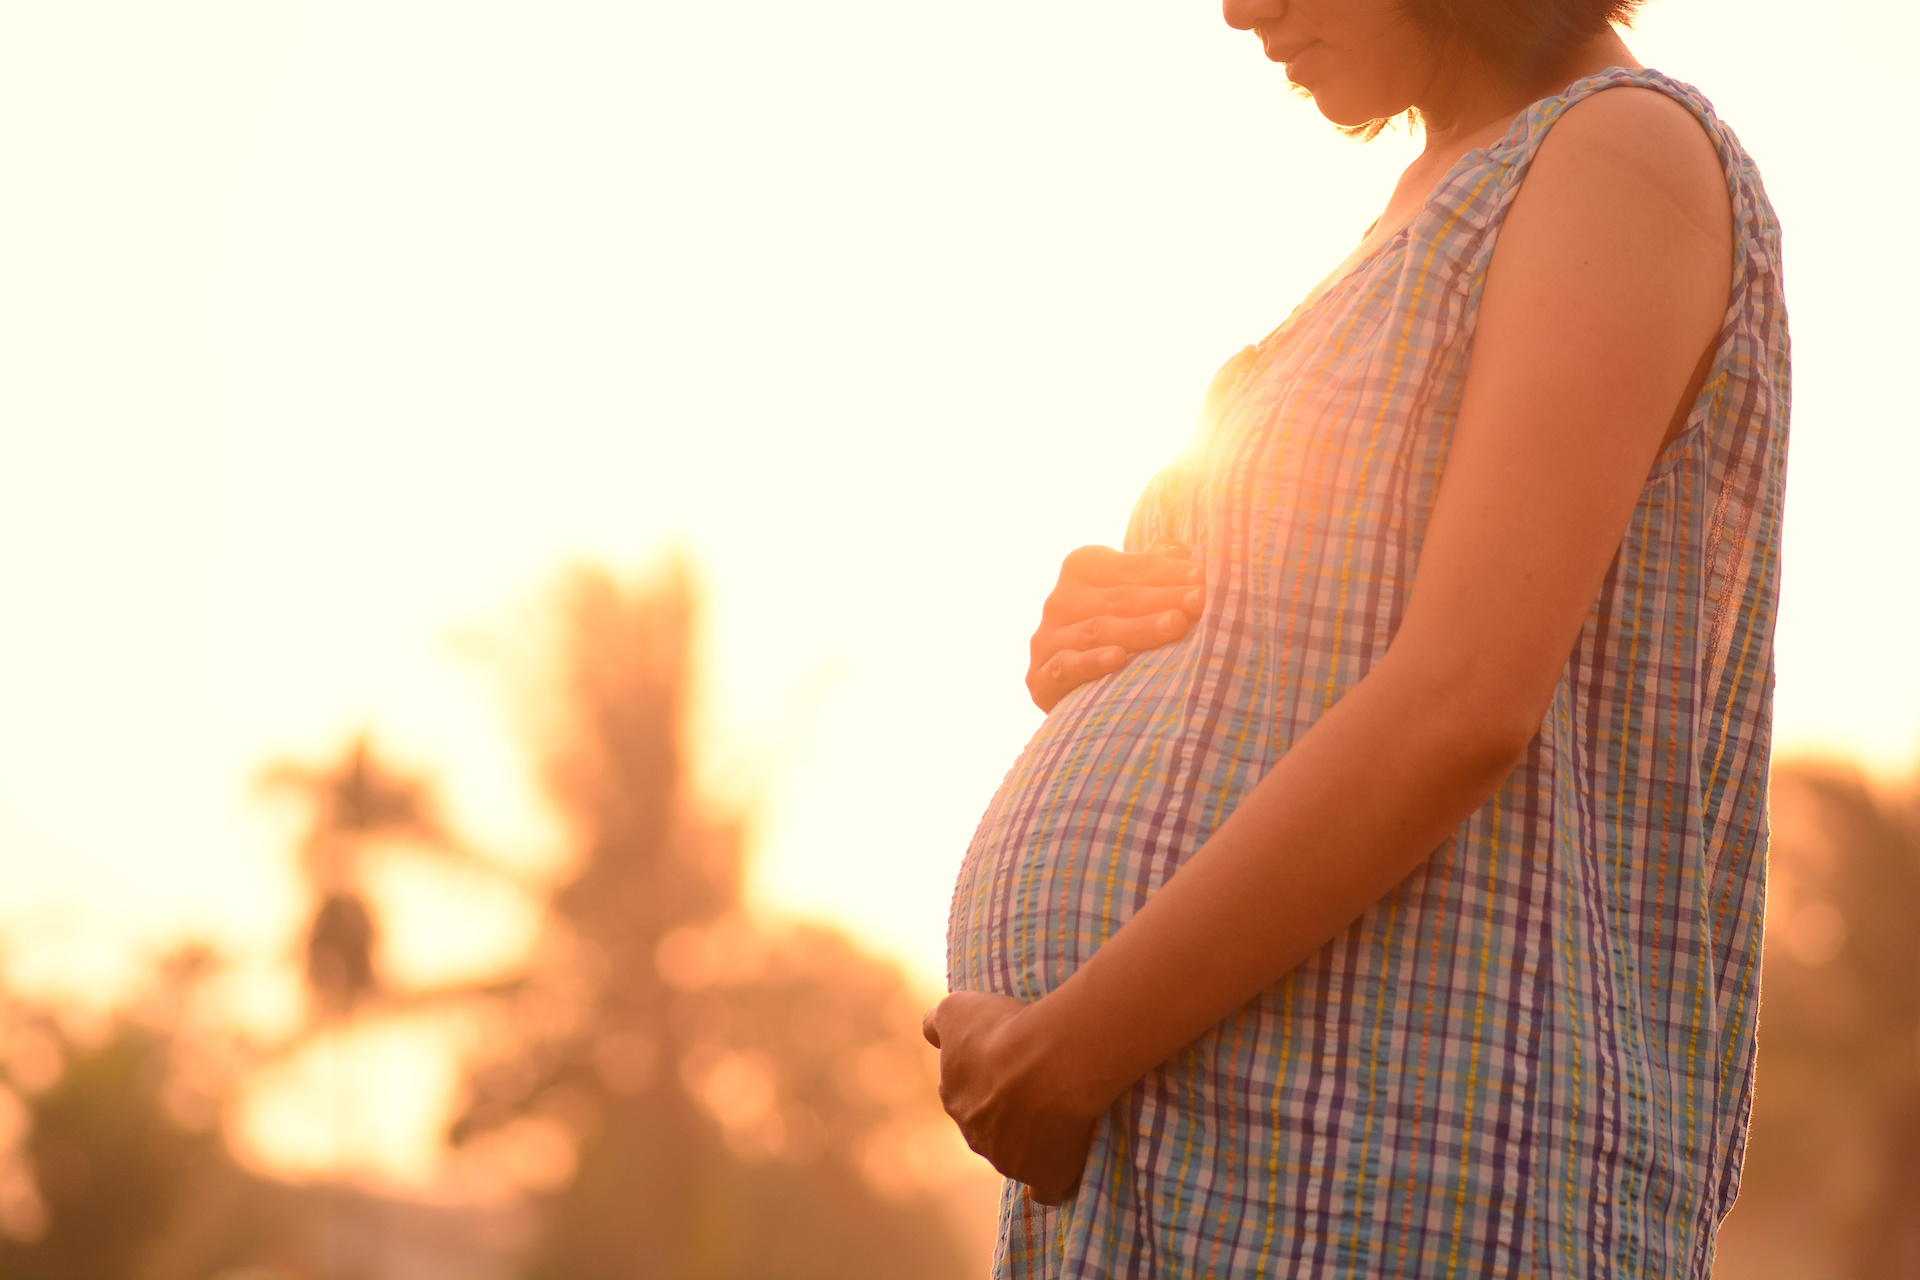 It's important to note that while the egg donor contributes genetically to the baby, she does not have a biological connection in terms of gestation or being the birth mother. The woman who carries and gives birth to the baby, whether the intended mother or a surrogate, is the one who provides the gestational and nurturing environment during pregnancy.